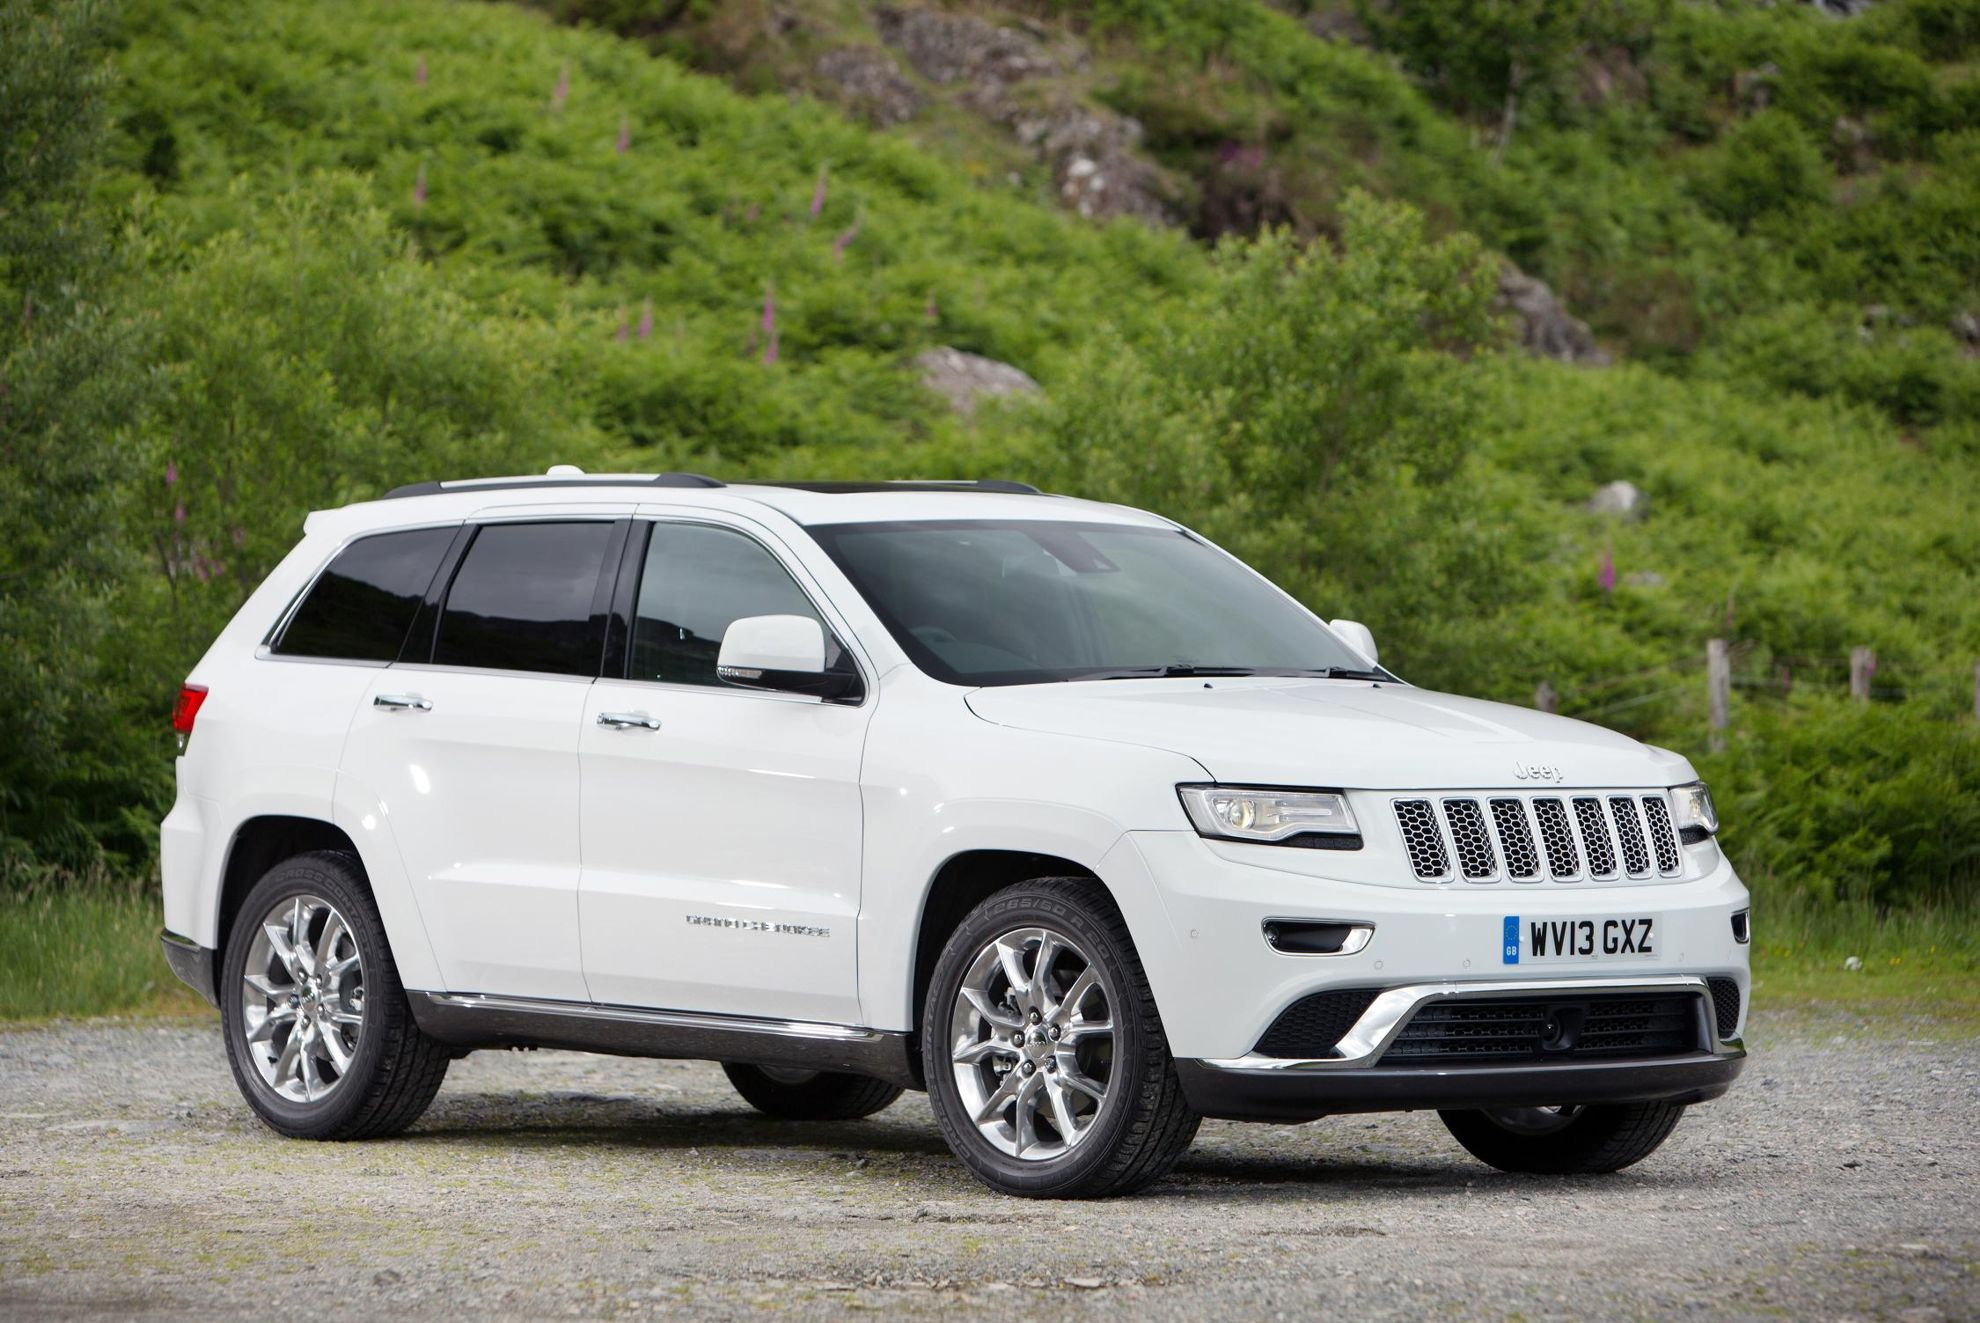 JEEP GRAND CHEROKEE TO SPONSOR NATIONAL GEOGRAPHIC PRIME TIME TV